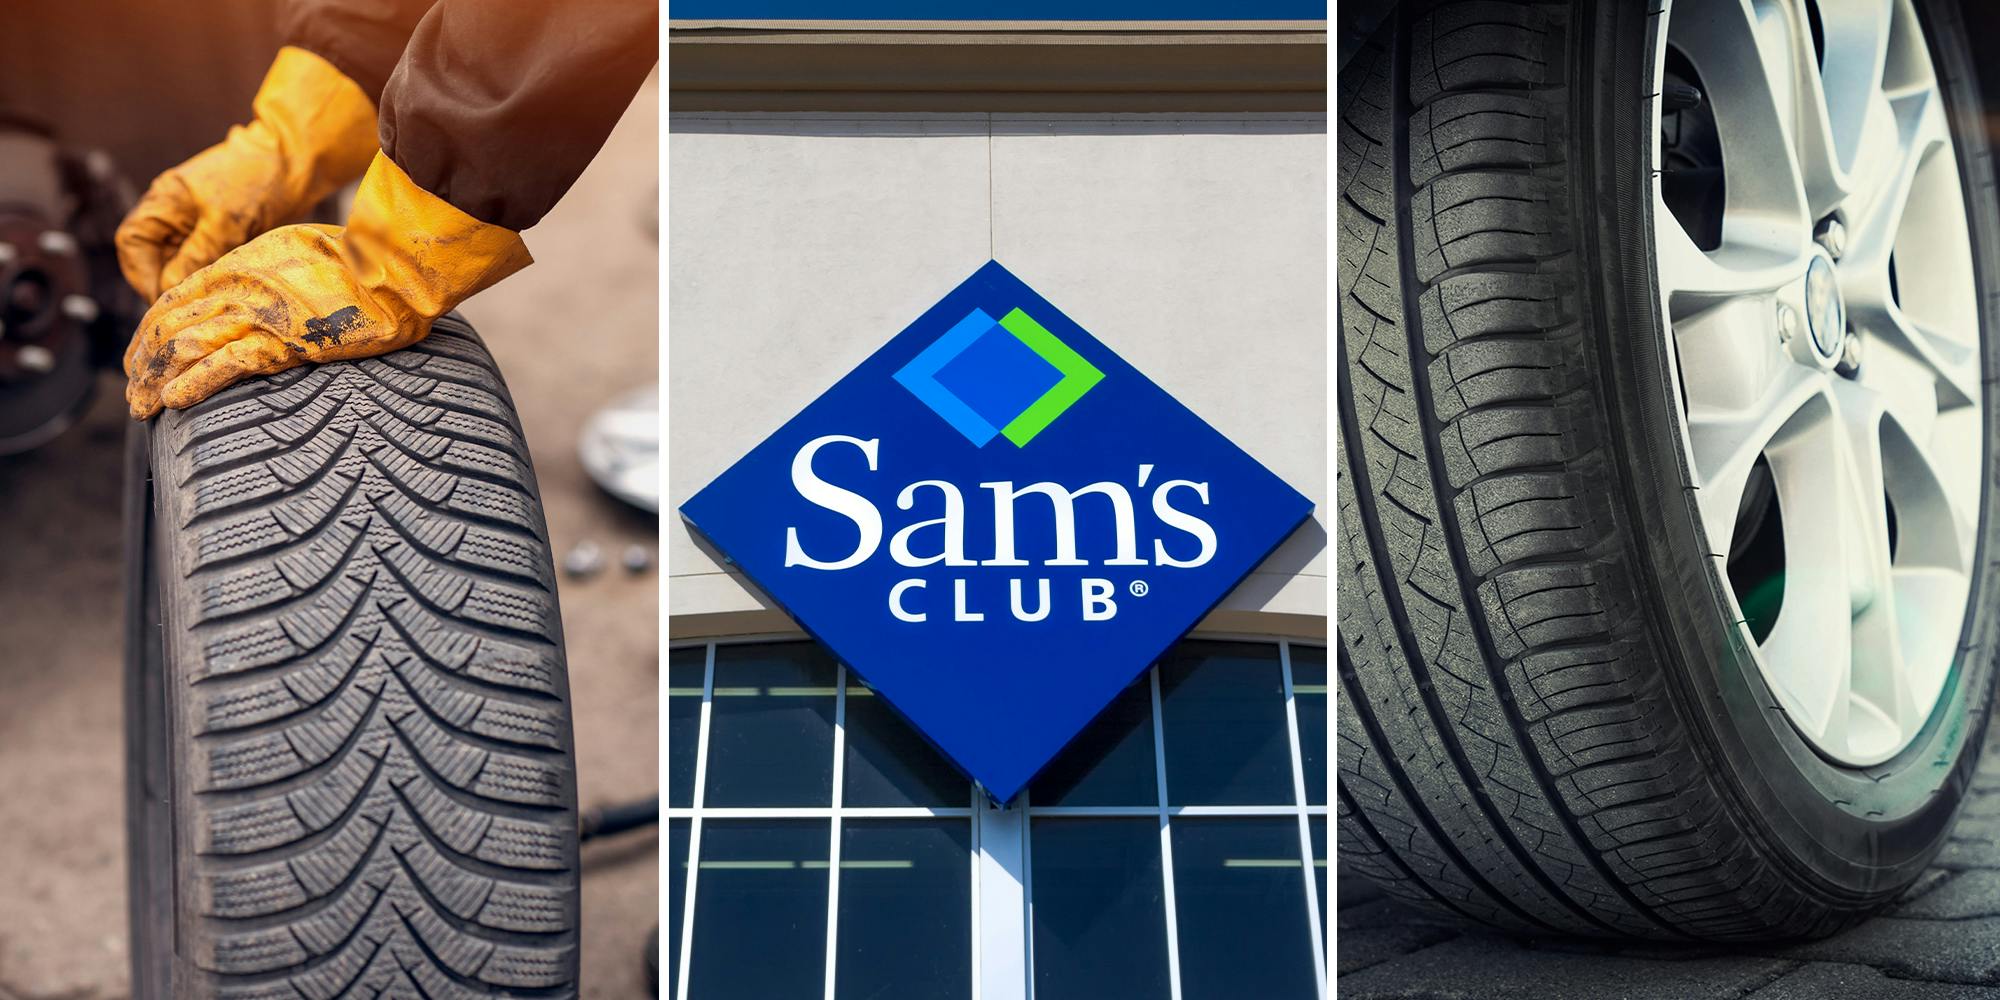 Does Sam’s Club offer free tire repairs?